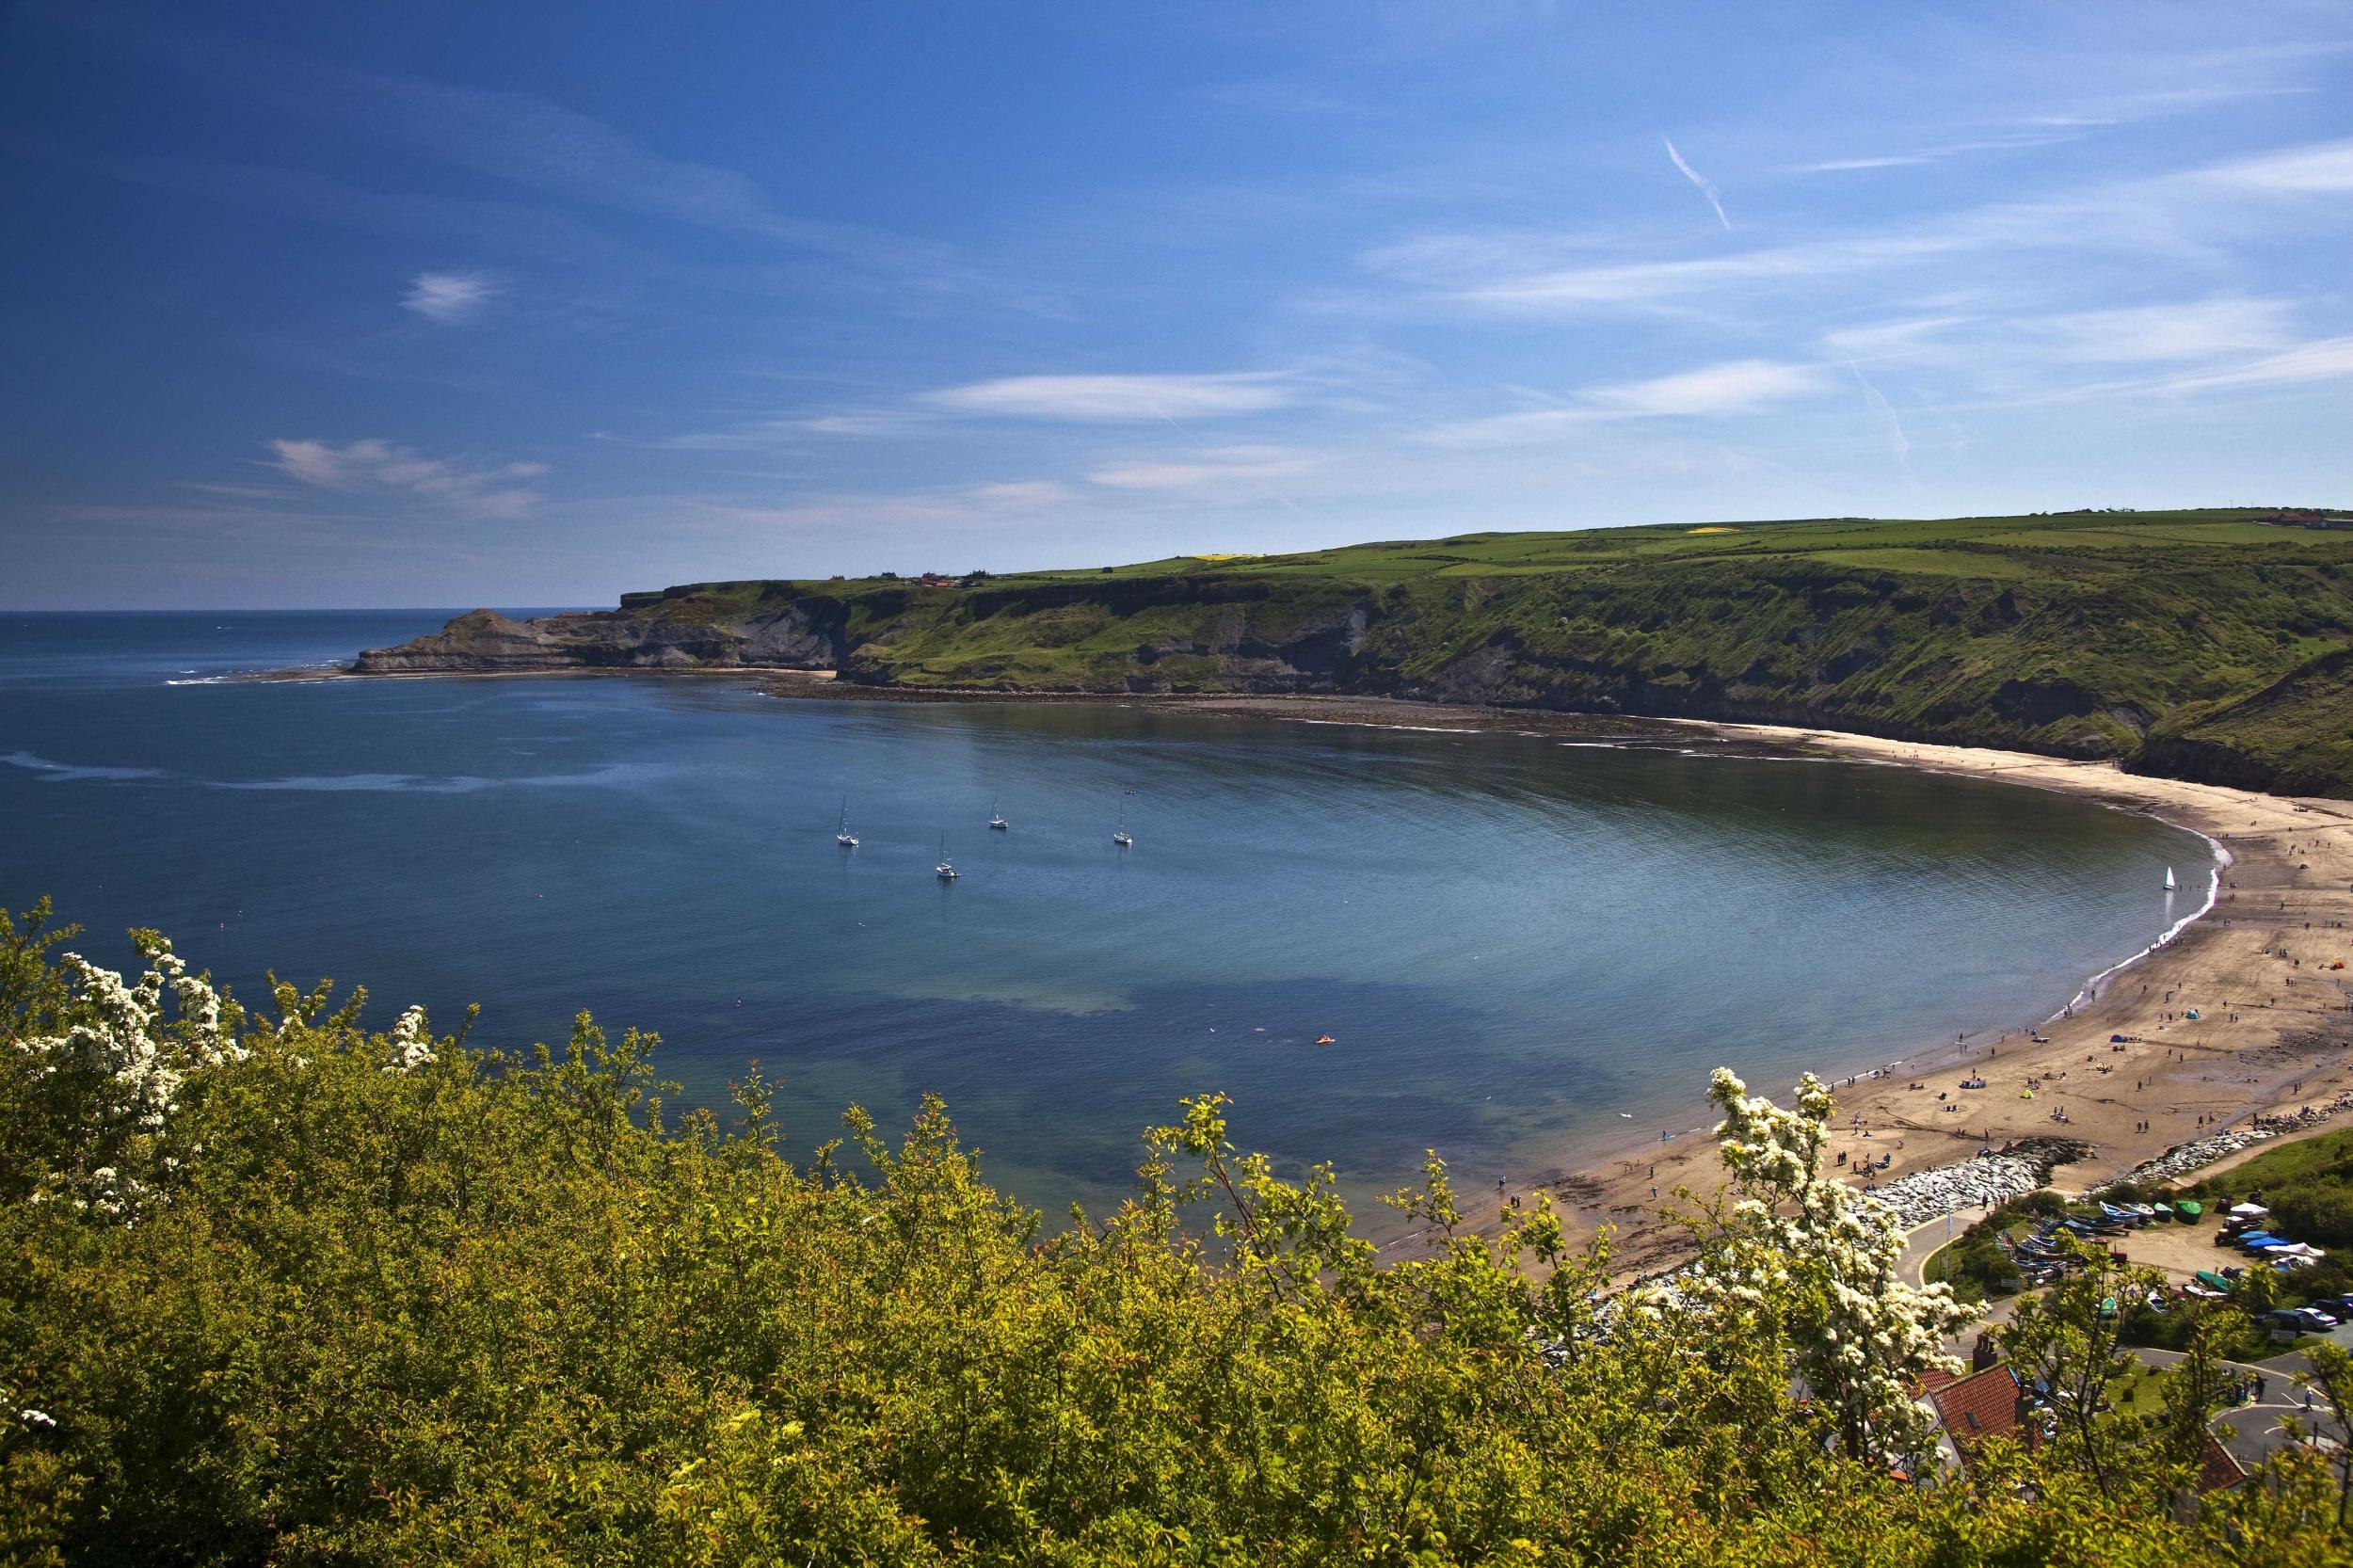 Runswick Bay, the halfway point of this walk, stretches for more than two miles